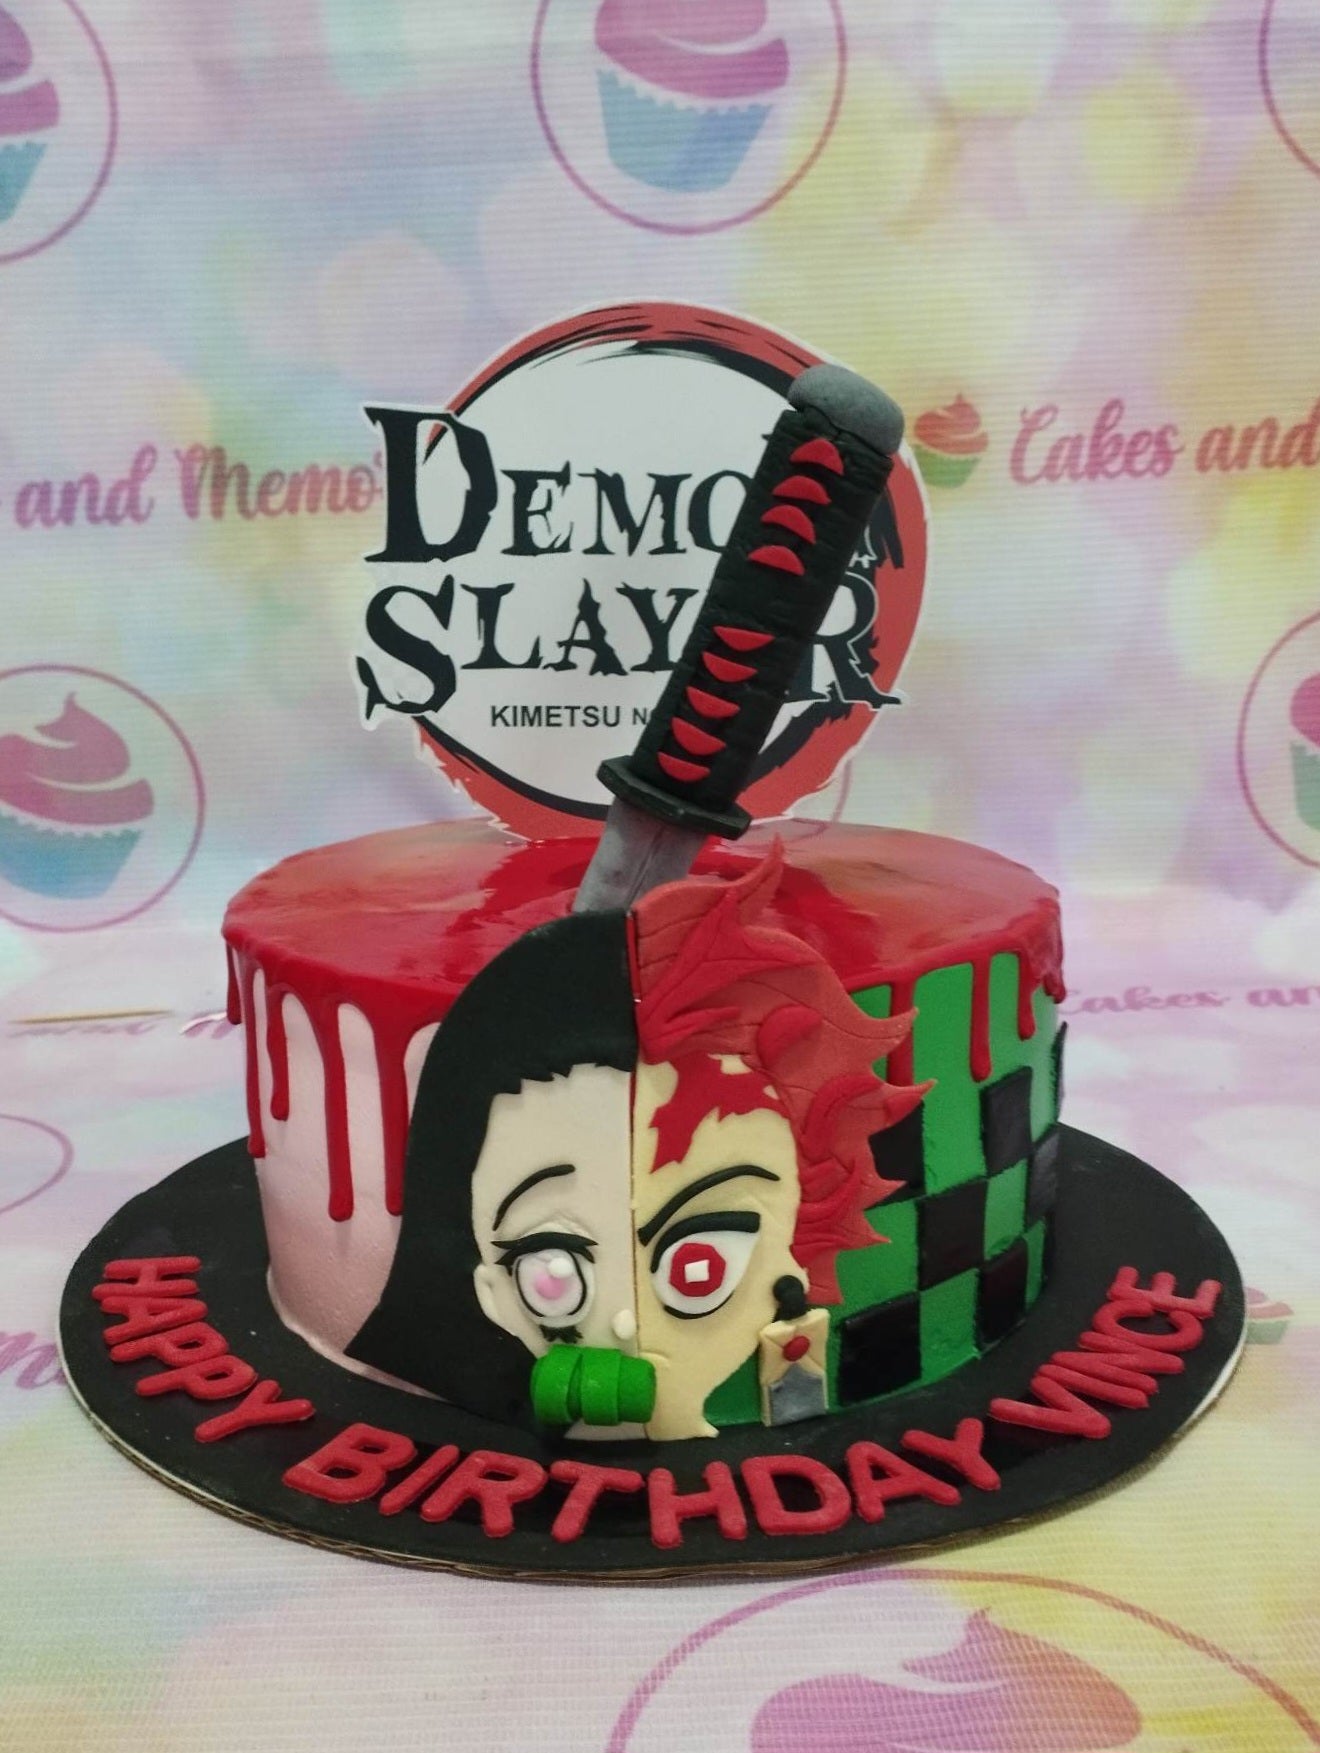 This custom decorated Demon Slayer cake is sure to please any fan of the anime. It is made with layers of green and white checkered pattern and a red drip effect on the outside. The characters Tanjiro Kamado, Nezuko, Shinobu Kocho, Senitsu, and Hashibira are all featured in perfect detail on top of the cake. The cake is finished with a katana sword for the ultimate effect. Make their special day truly memorable with this personalized Demon Slayer themed birthday cake.